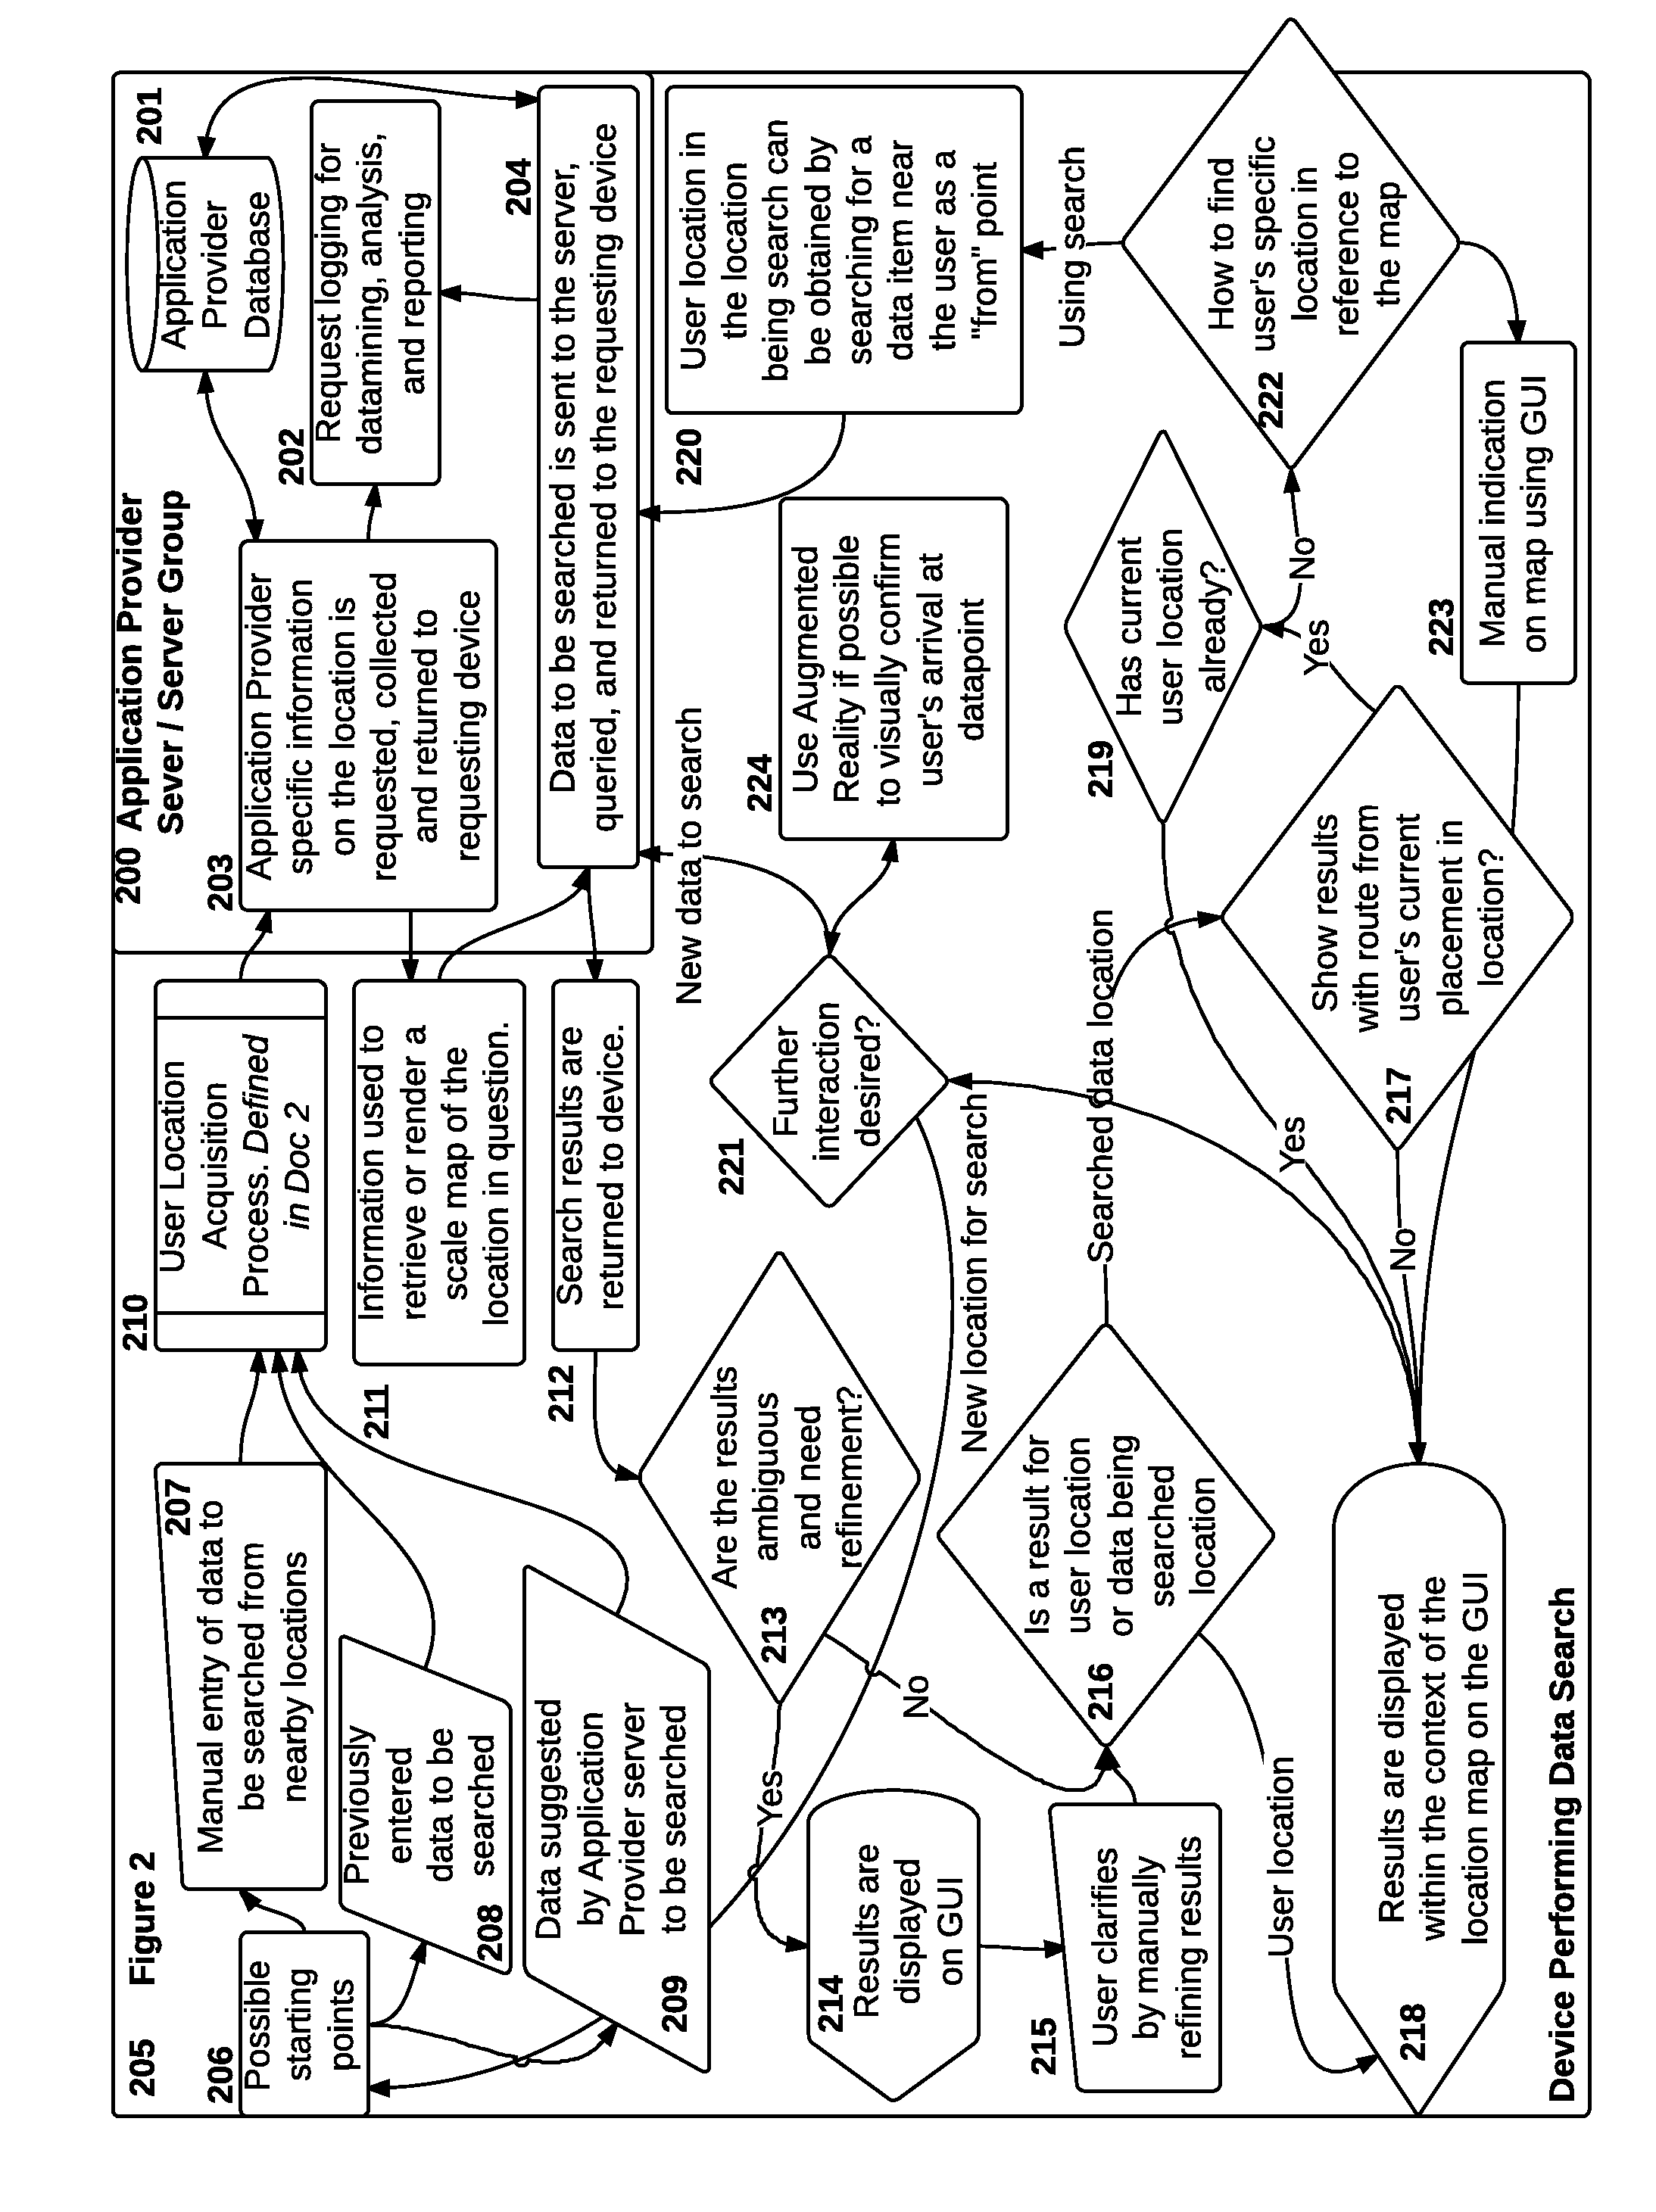 Systems and Methods of Mapping Locales